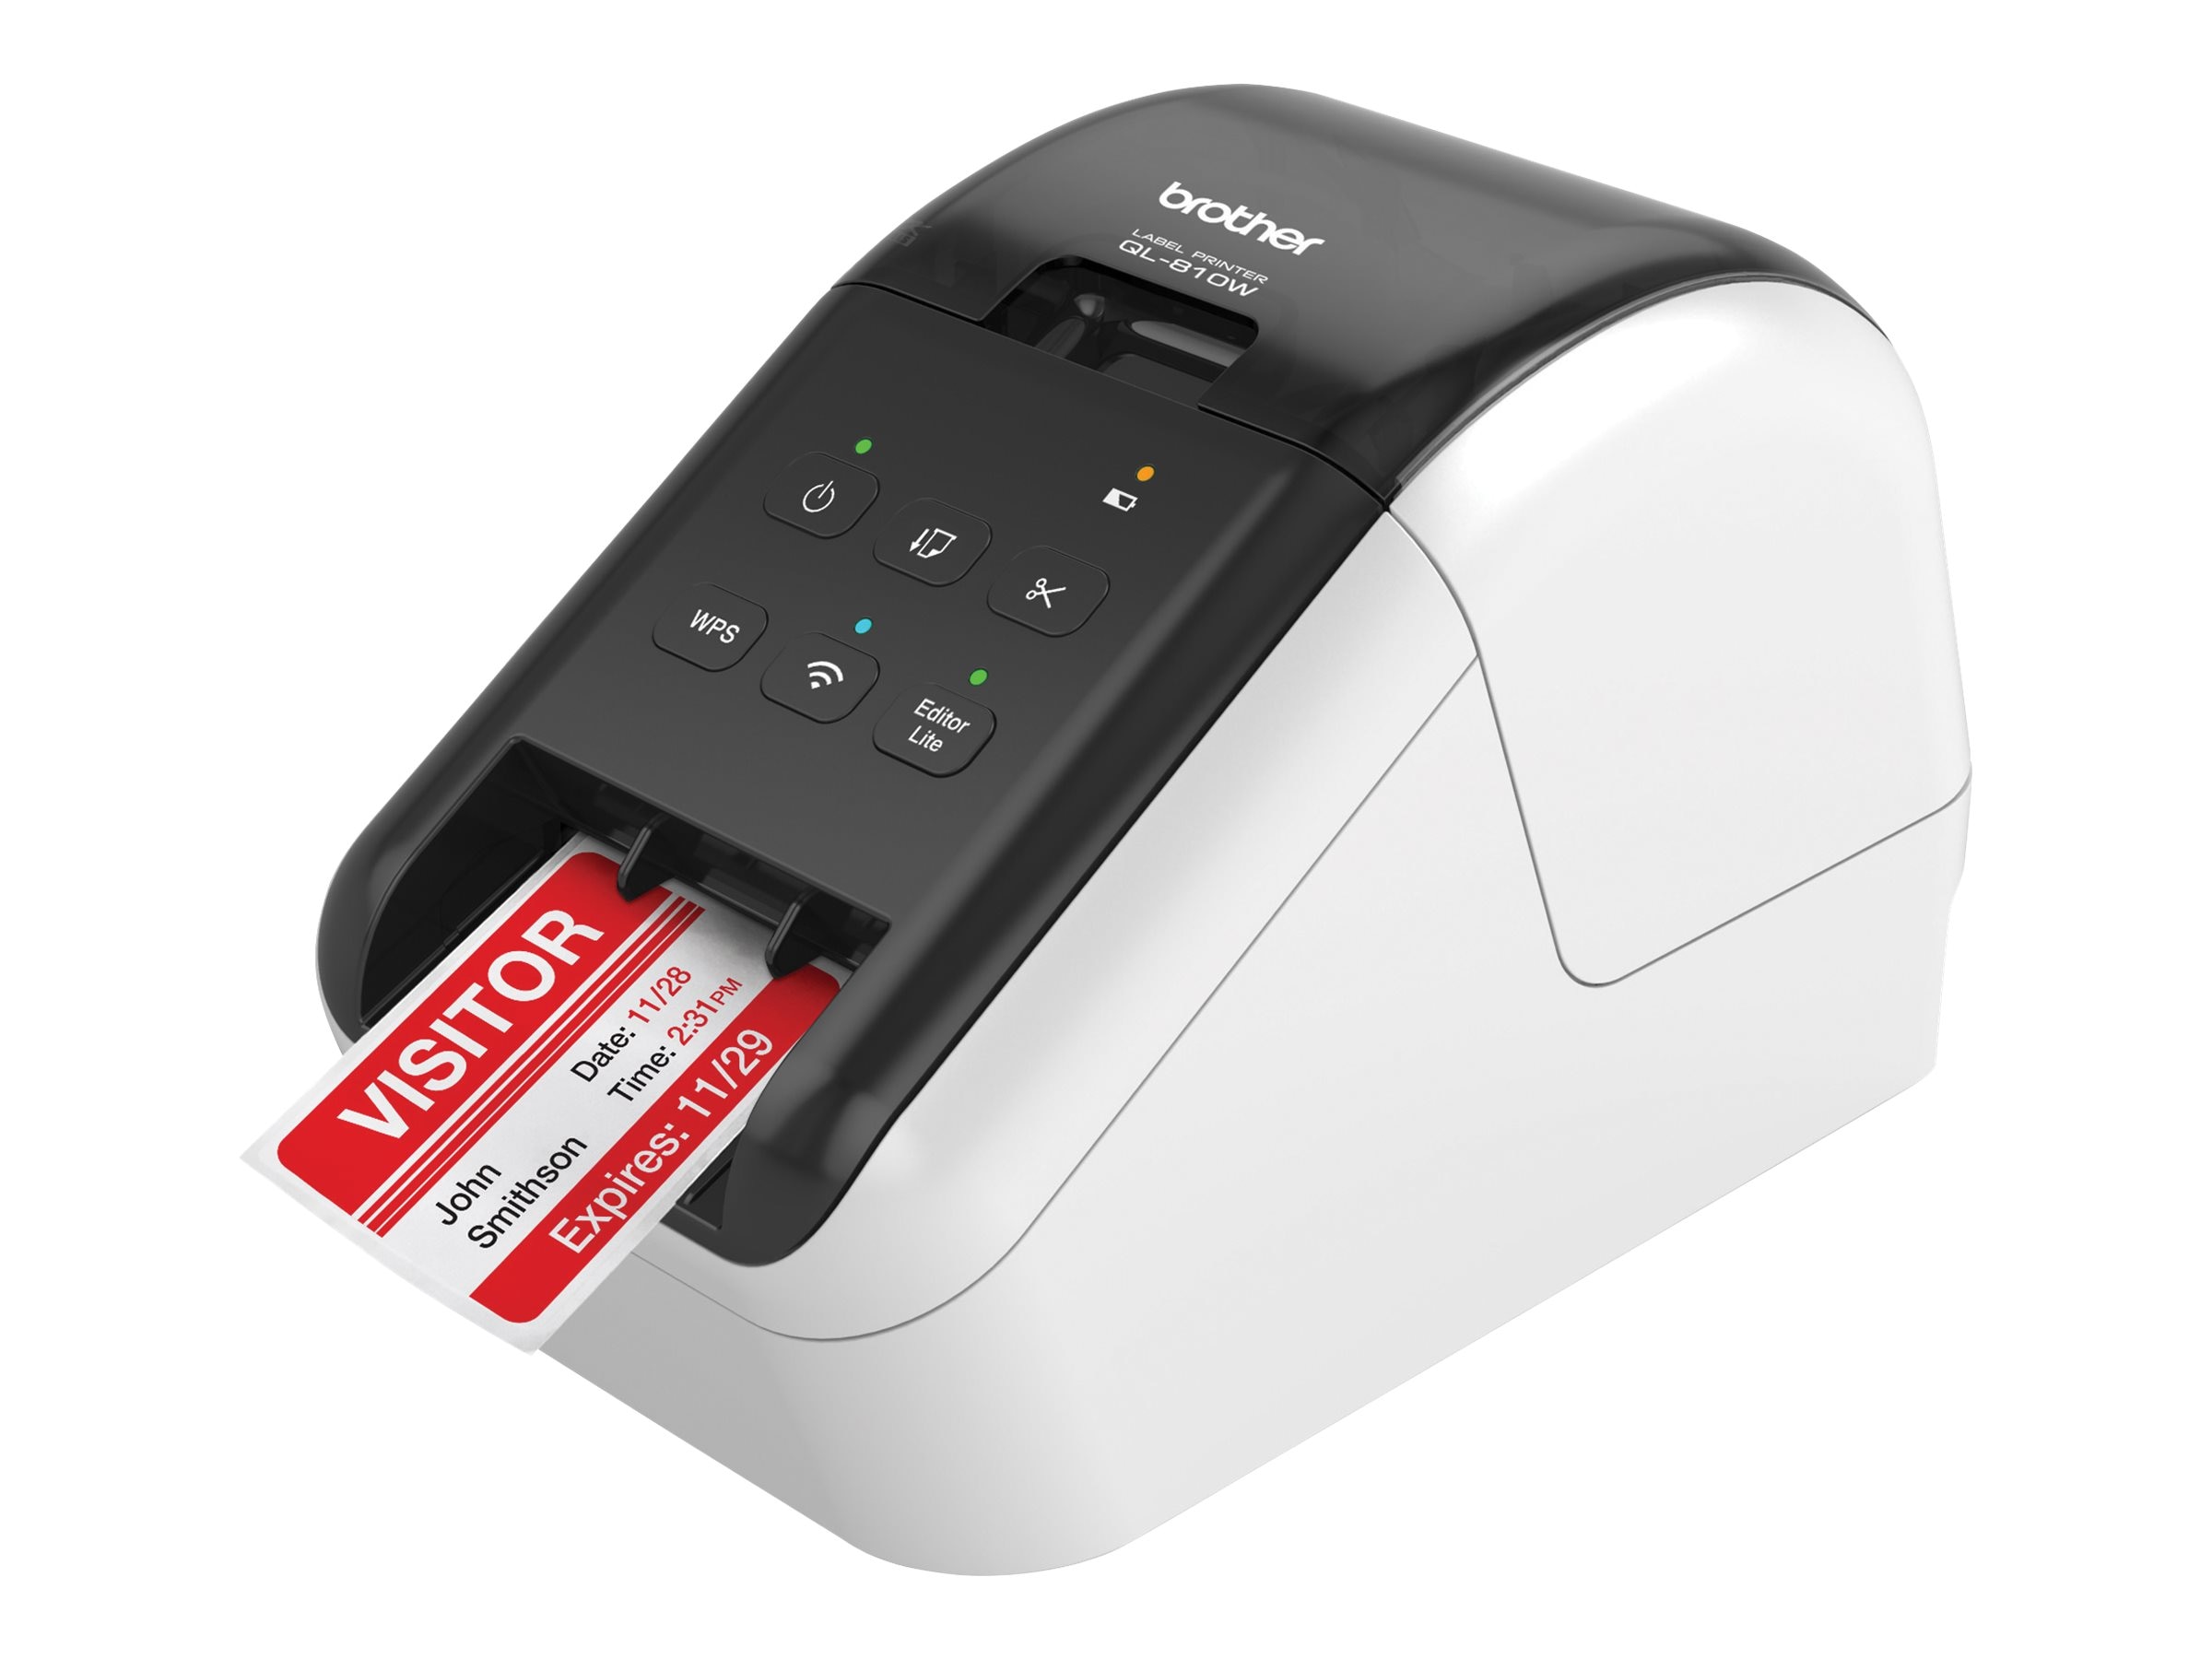 Wireless Shipping Label Printer AirPrint, Wi-Fi Print from iPhone, iPad, Mac, Windows, Chromebook, Android - 2